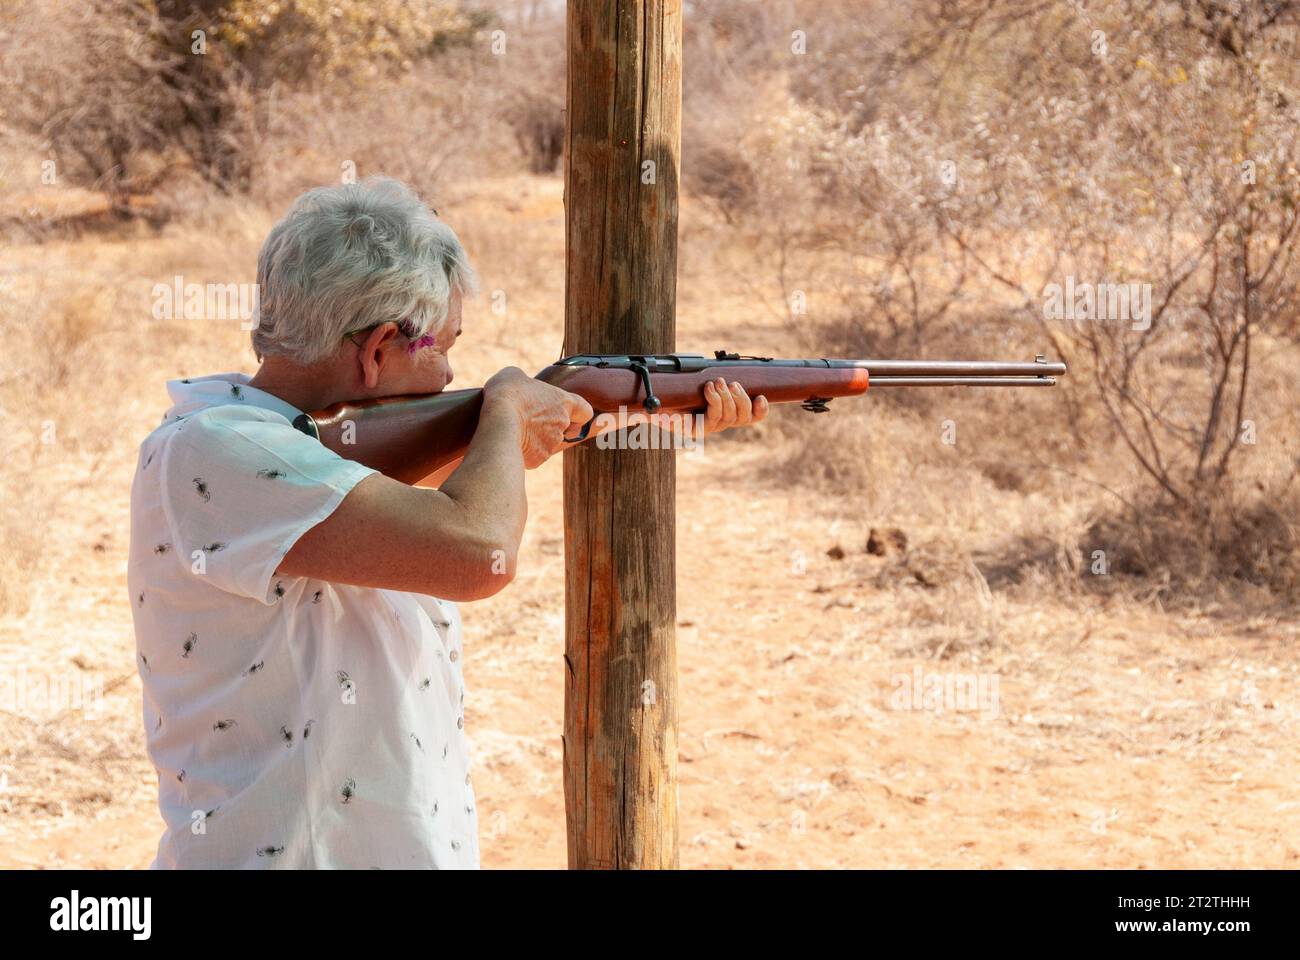 An old lady takes aim with a rifle at a hunting farm in South Africa Stock Photo